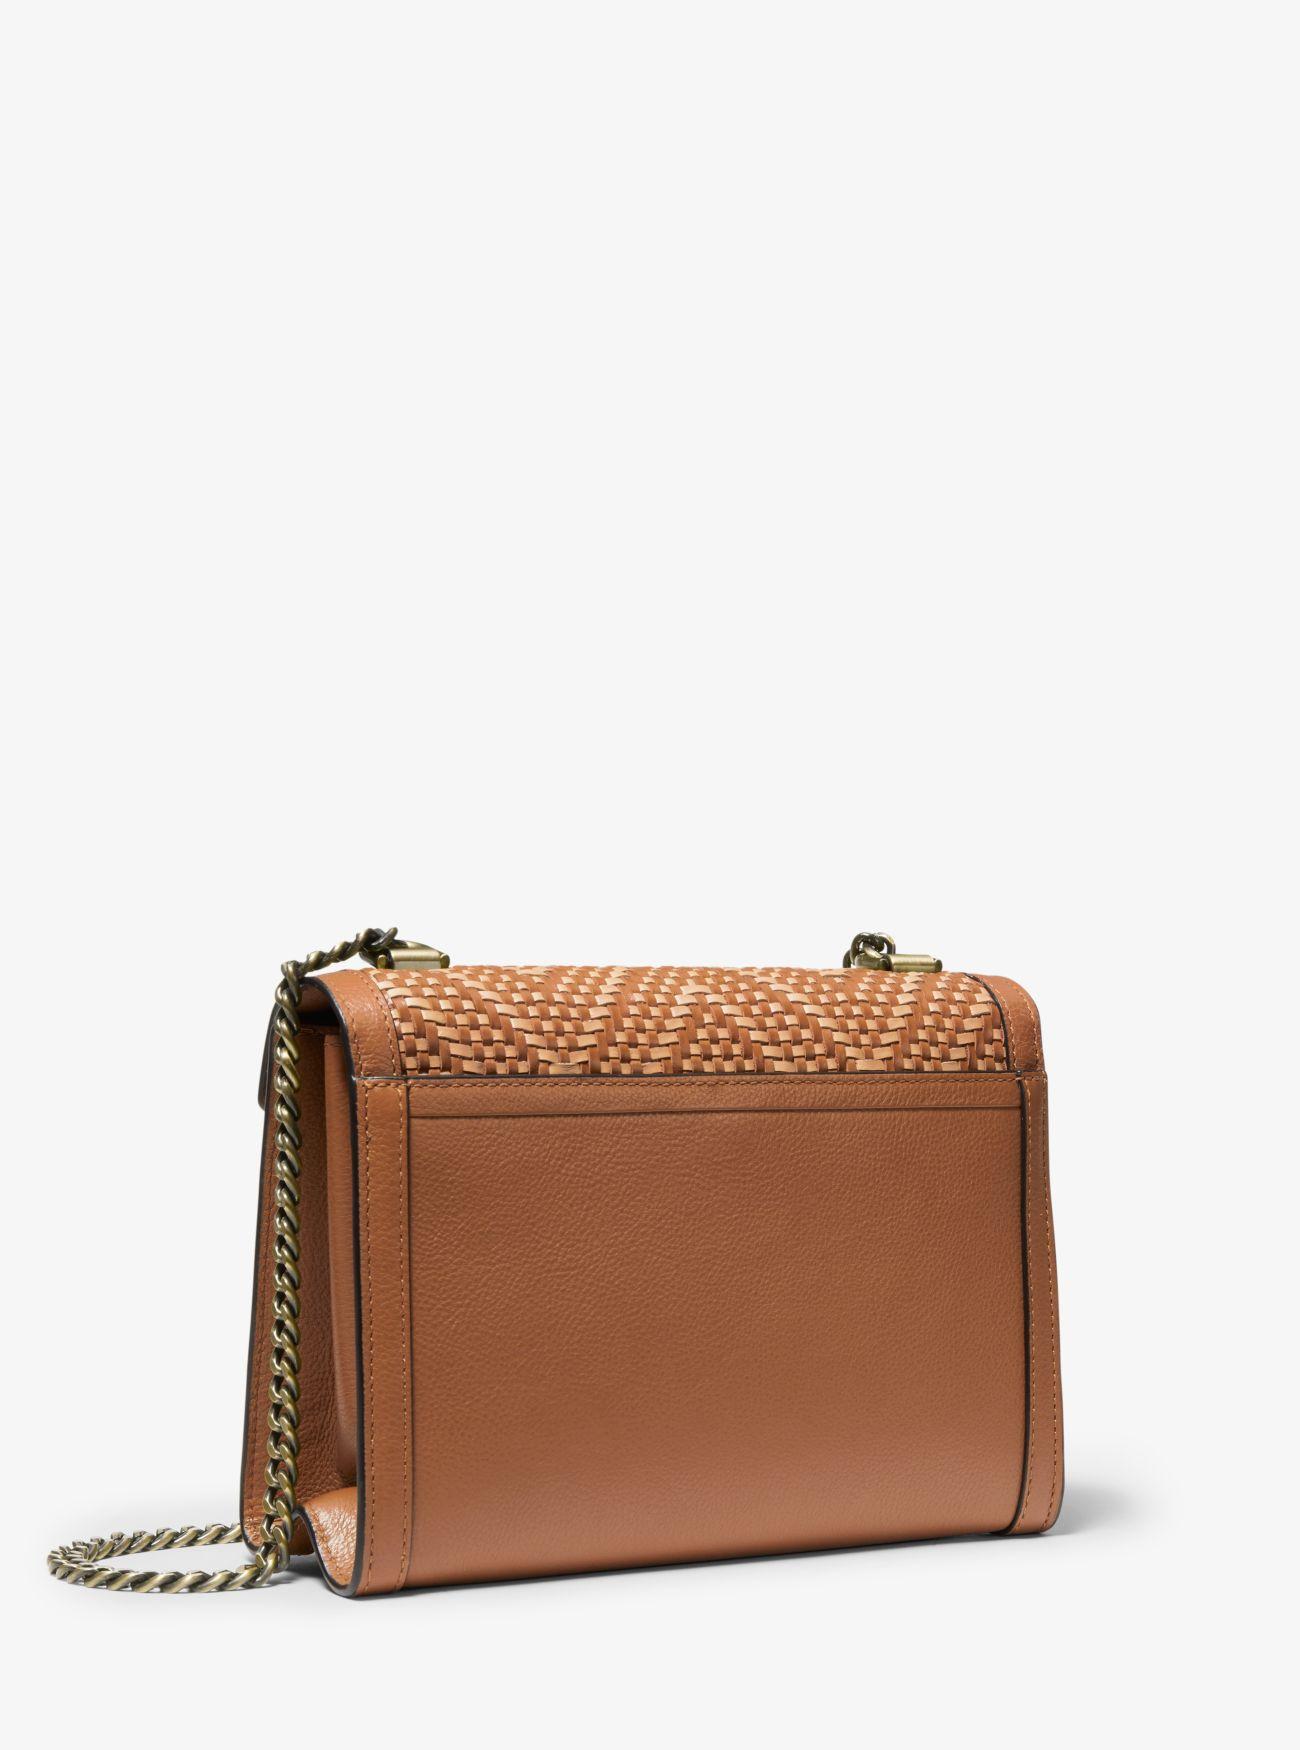 whitney large woven leather convertible shoulder bag